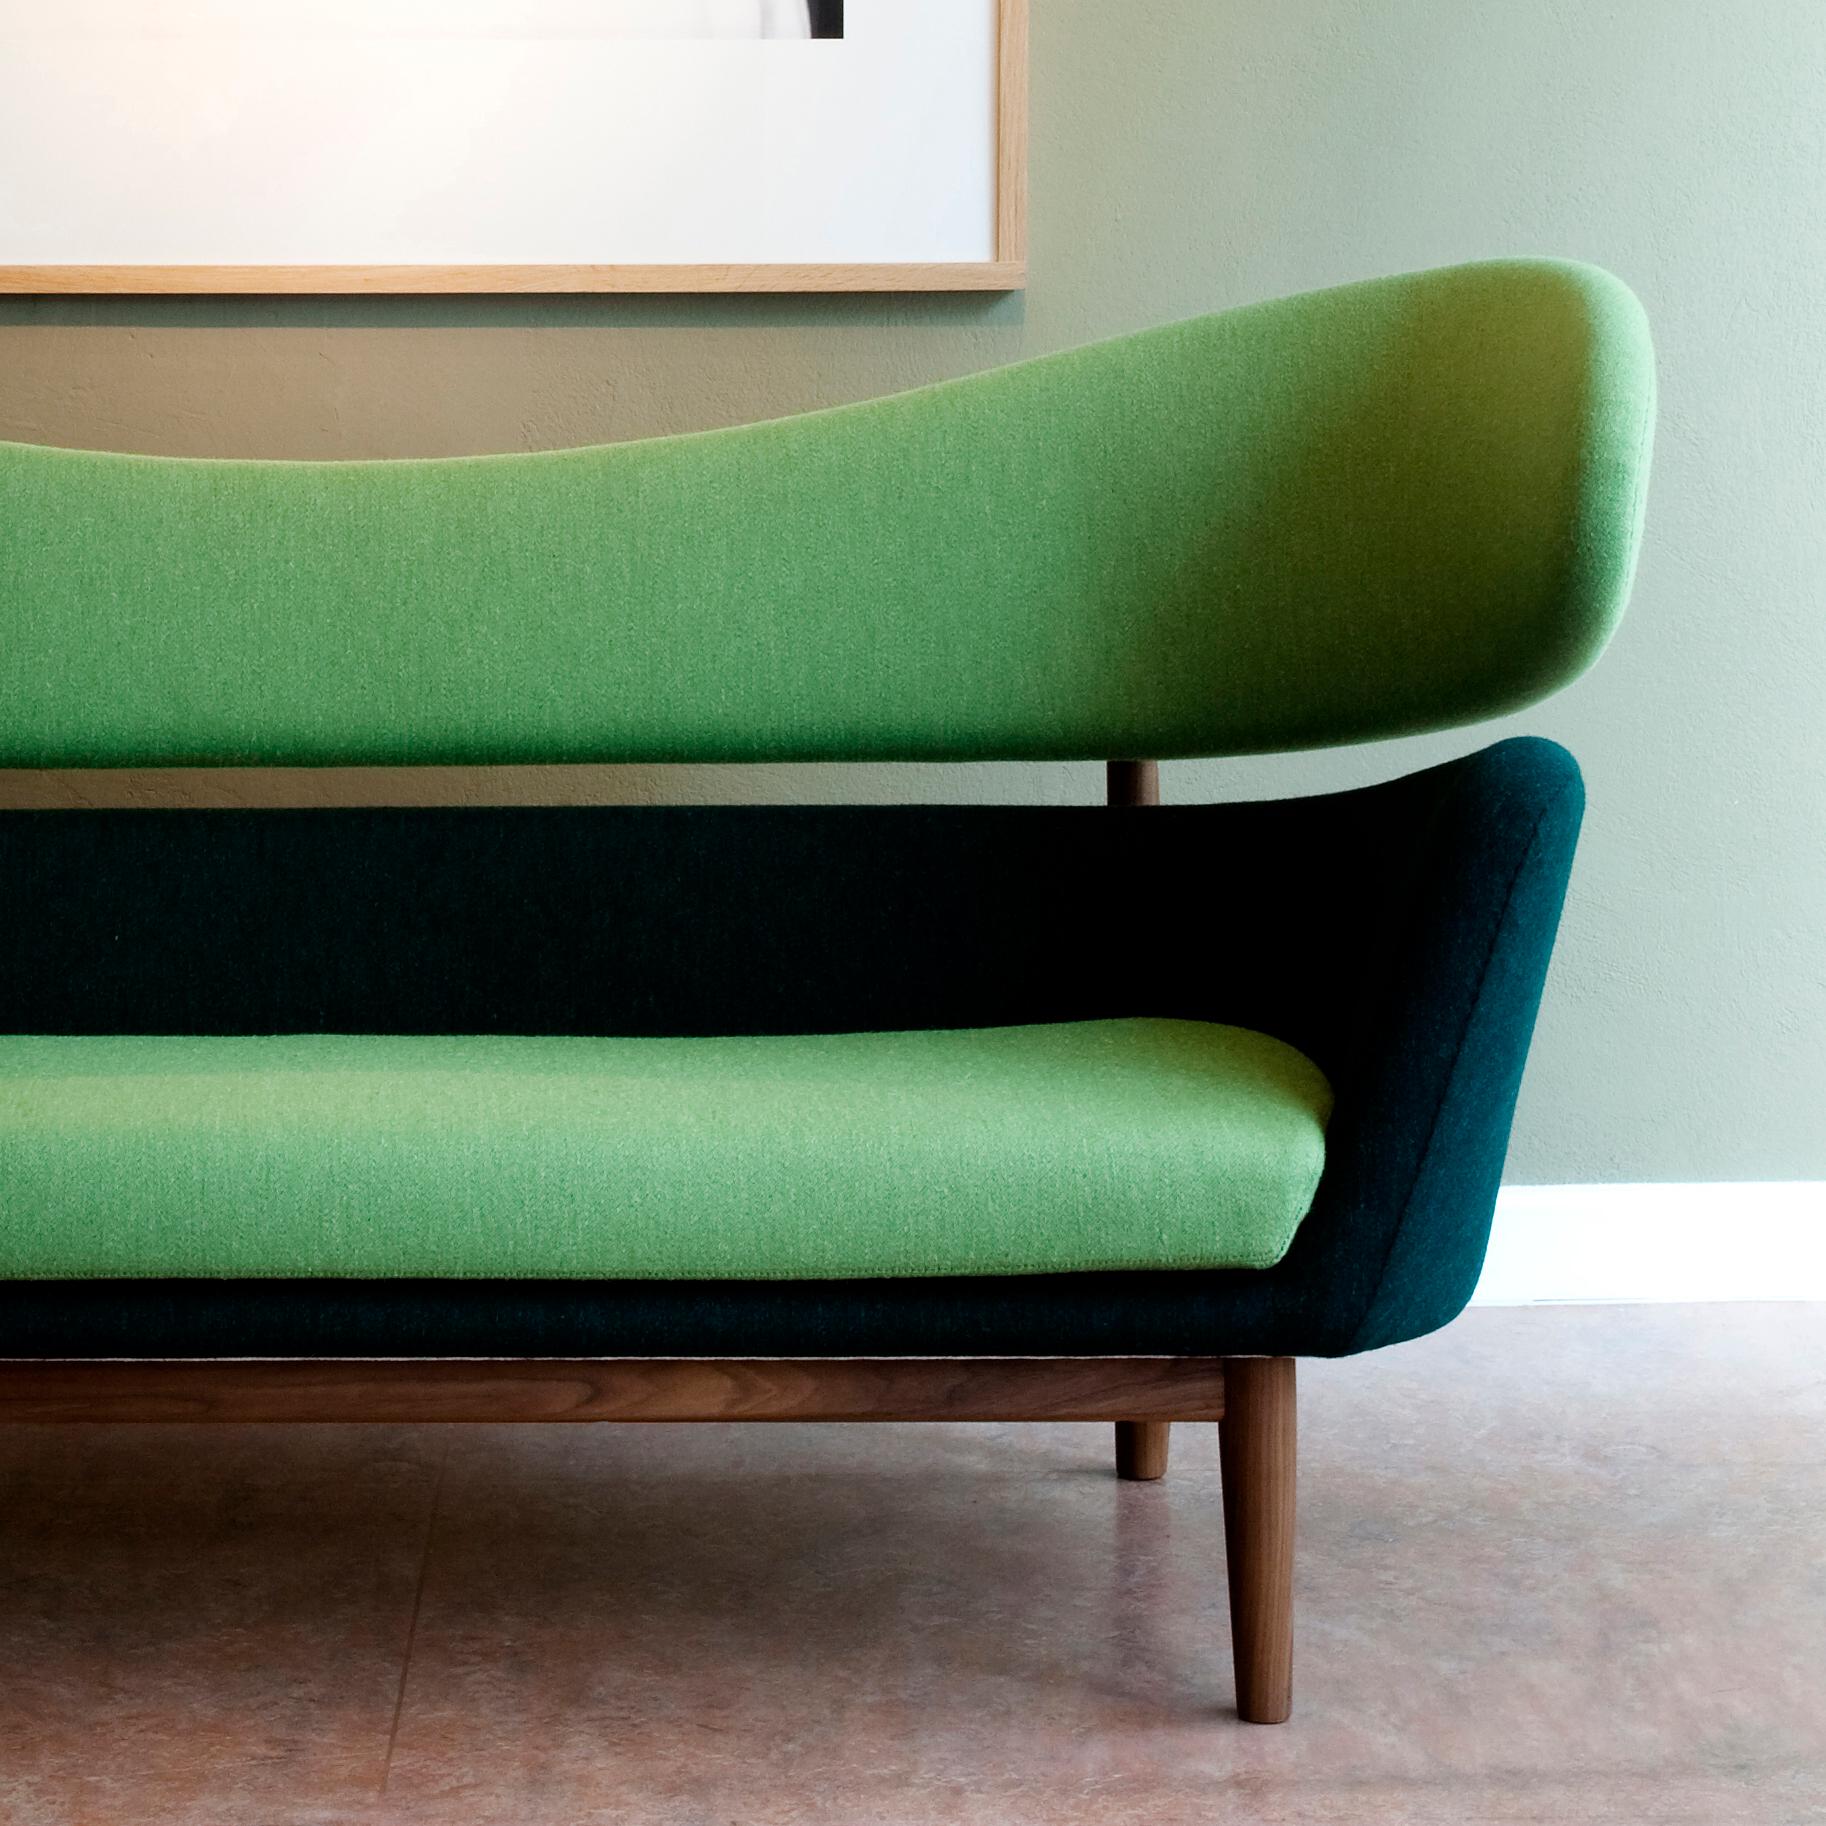 Sofa designed by Finn Juhl in 1951, relaunched in 2009.
Manufactured by House of Finn Juhl in Denmark.

Edgar Kaufmann Jr., a prolific art collector and director of the Industrial Design Department at the Museum of Modern Art in New York,